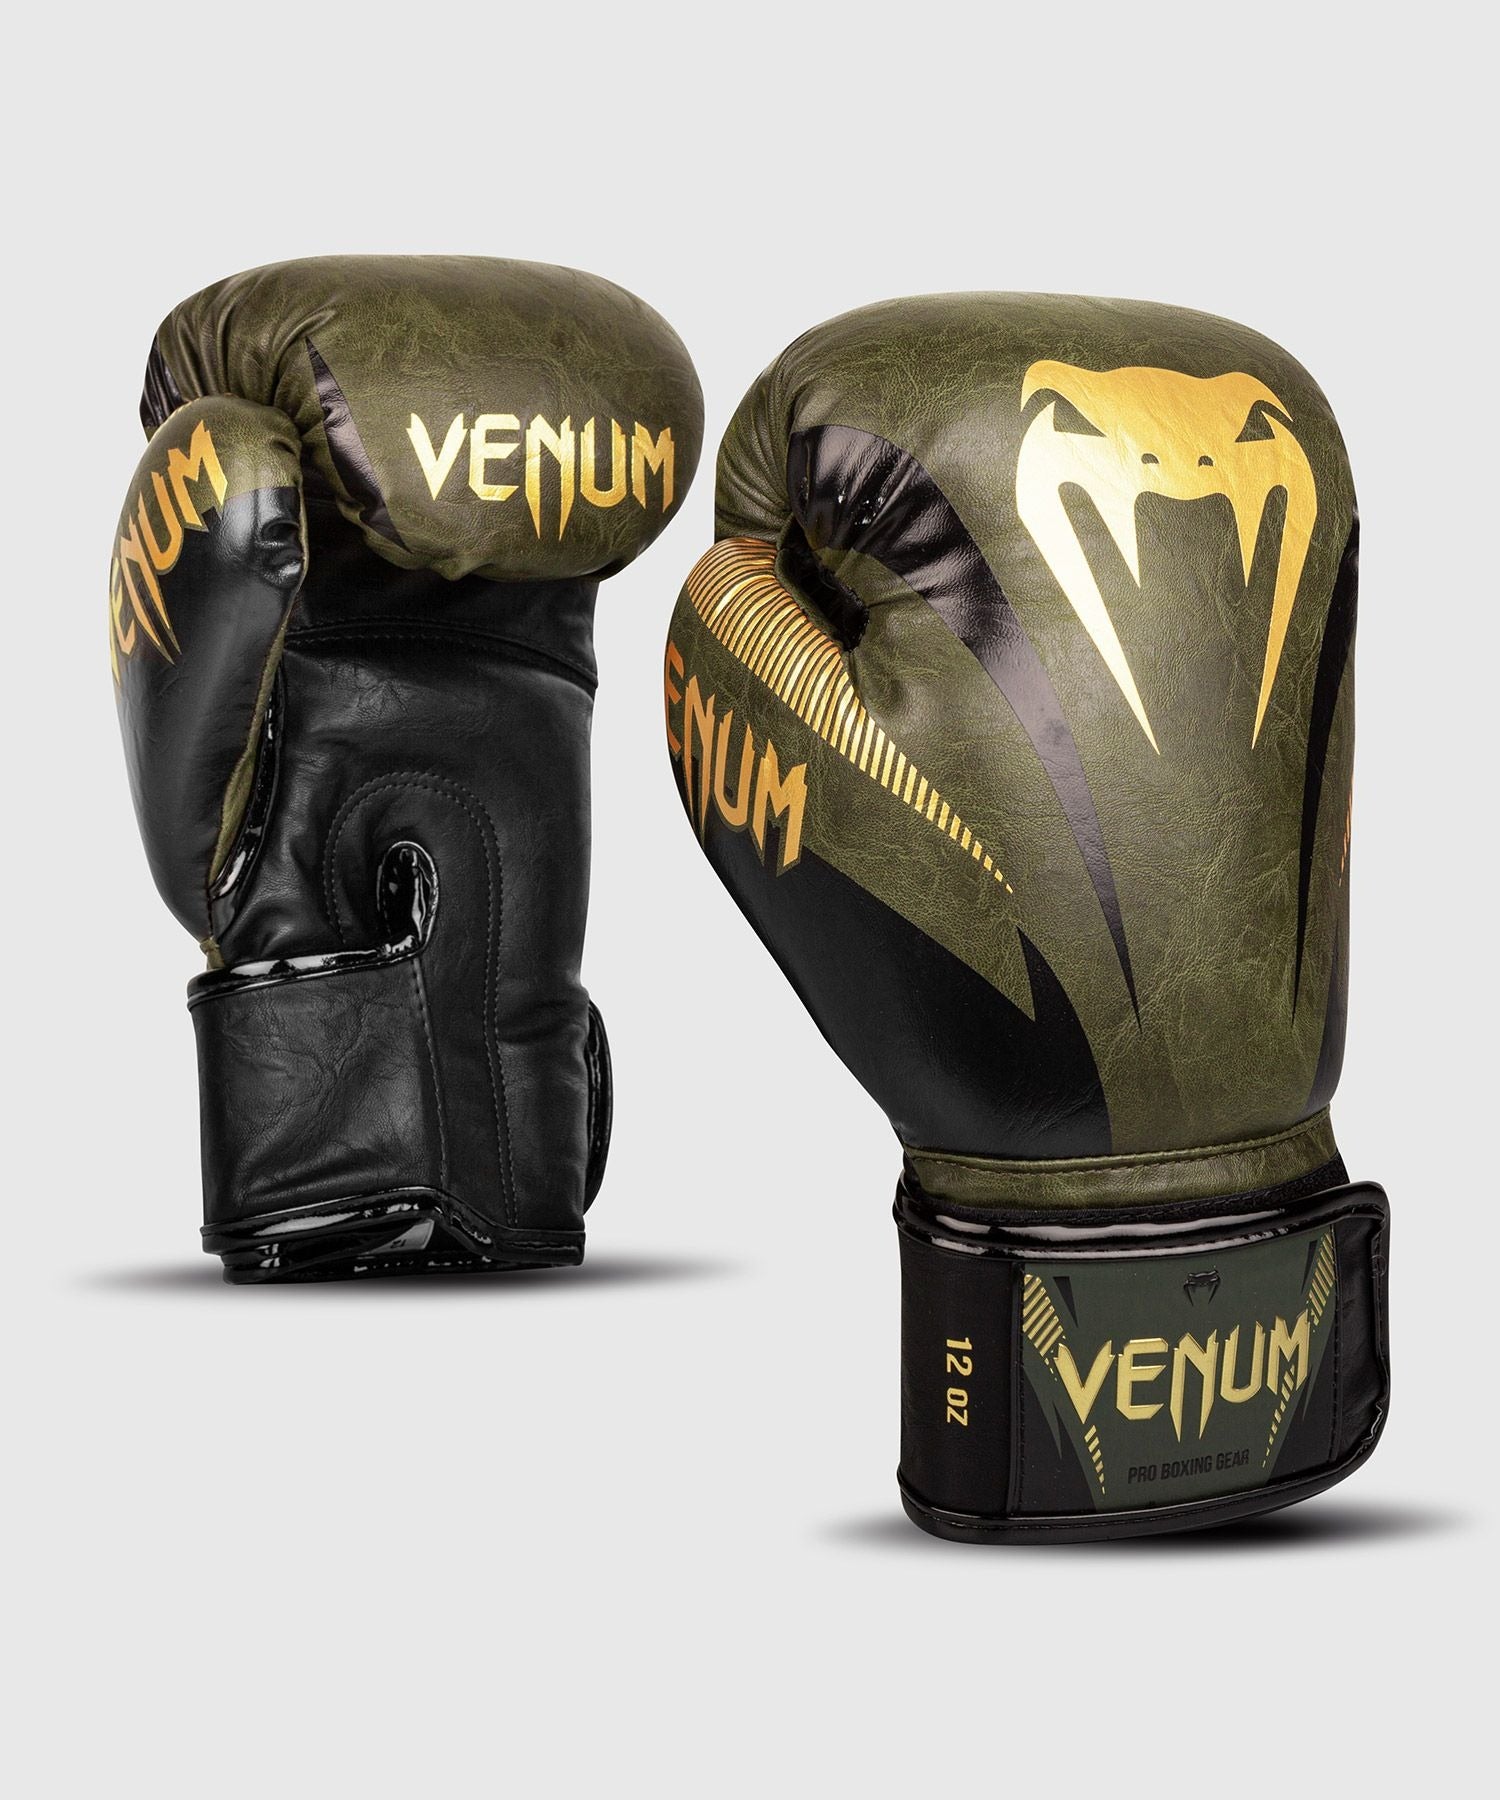 Boxing Gloves for Training, Sparring and Competition